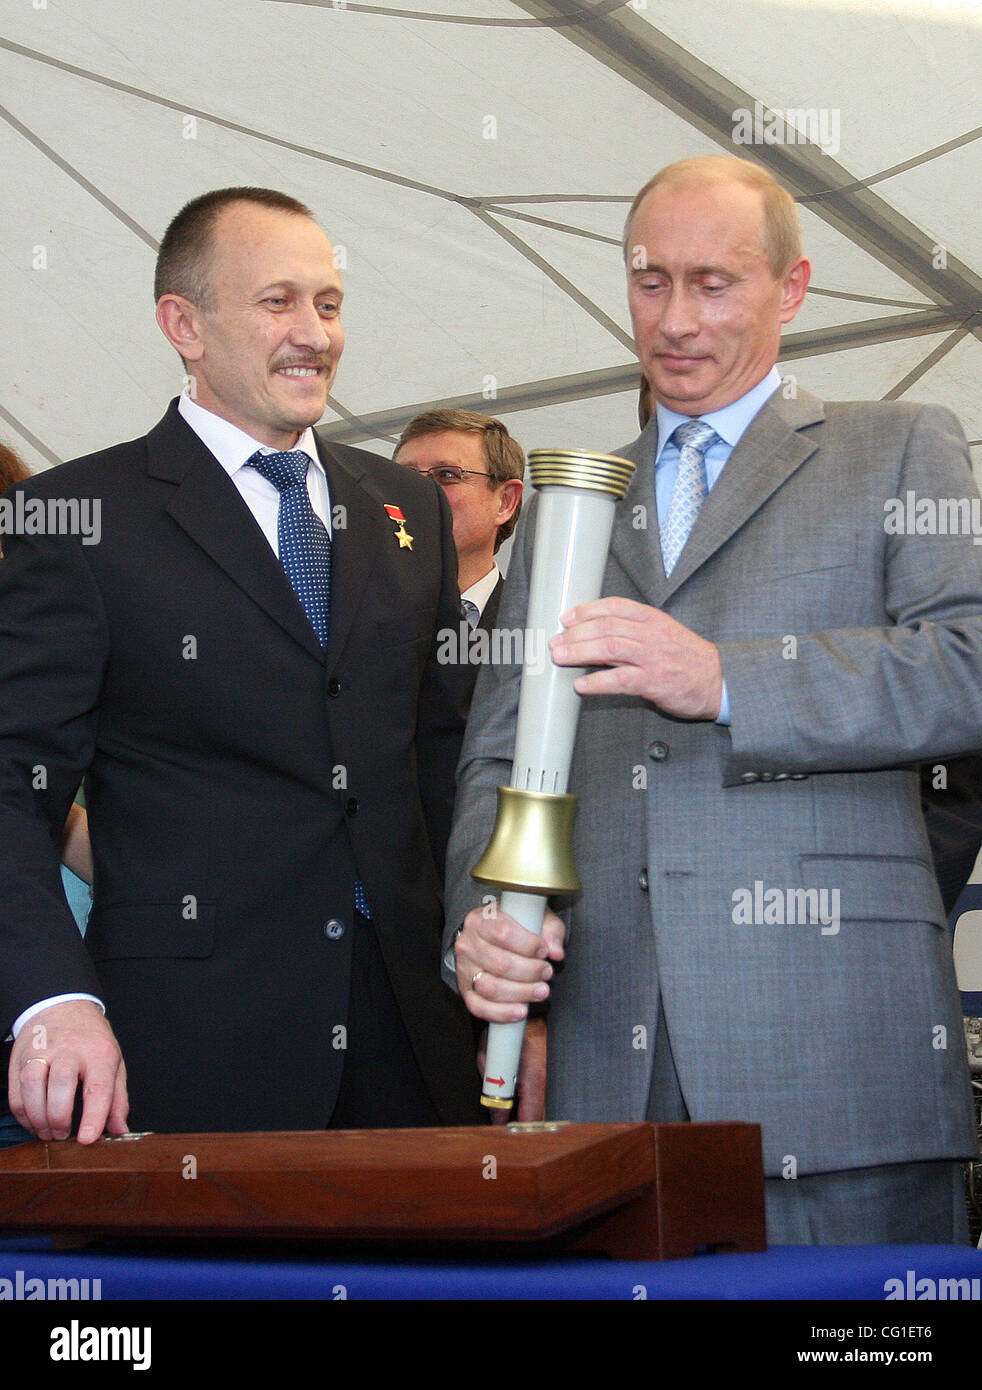 Vladimir Putin Visiting The Klimov Aircraft Engine Factory in St.Petersburg. President Vladimir Putin holding the 1980 Olympic torch, presented to him on Saturday, August 11 during a visit to an aircraft engine factory in St. Petersburg. Stock Photo